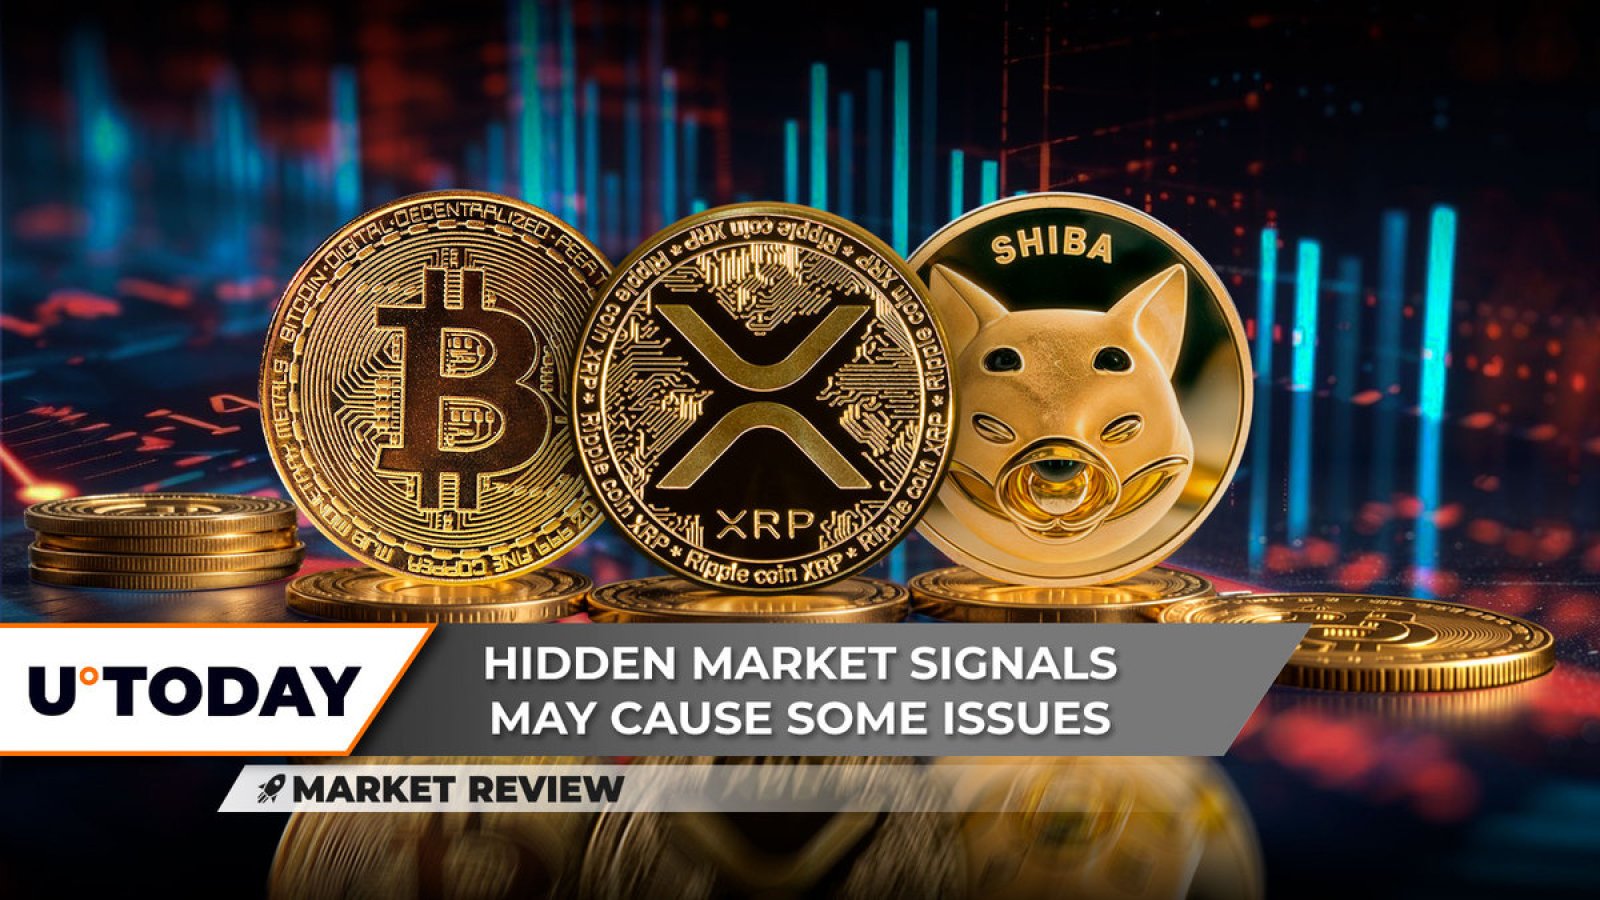 Bitcoin (BTC) Hidden Disaster Incoming? XRP Reaches Turning Point: What’s Next? Shiba Inu (SHIB) on Path to Victory?